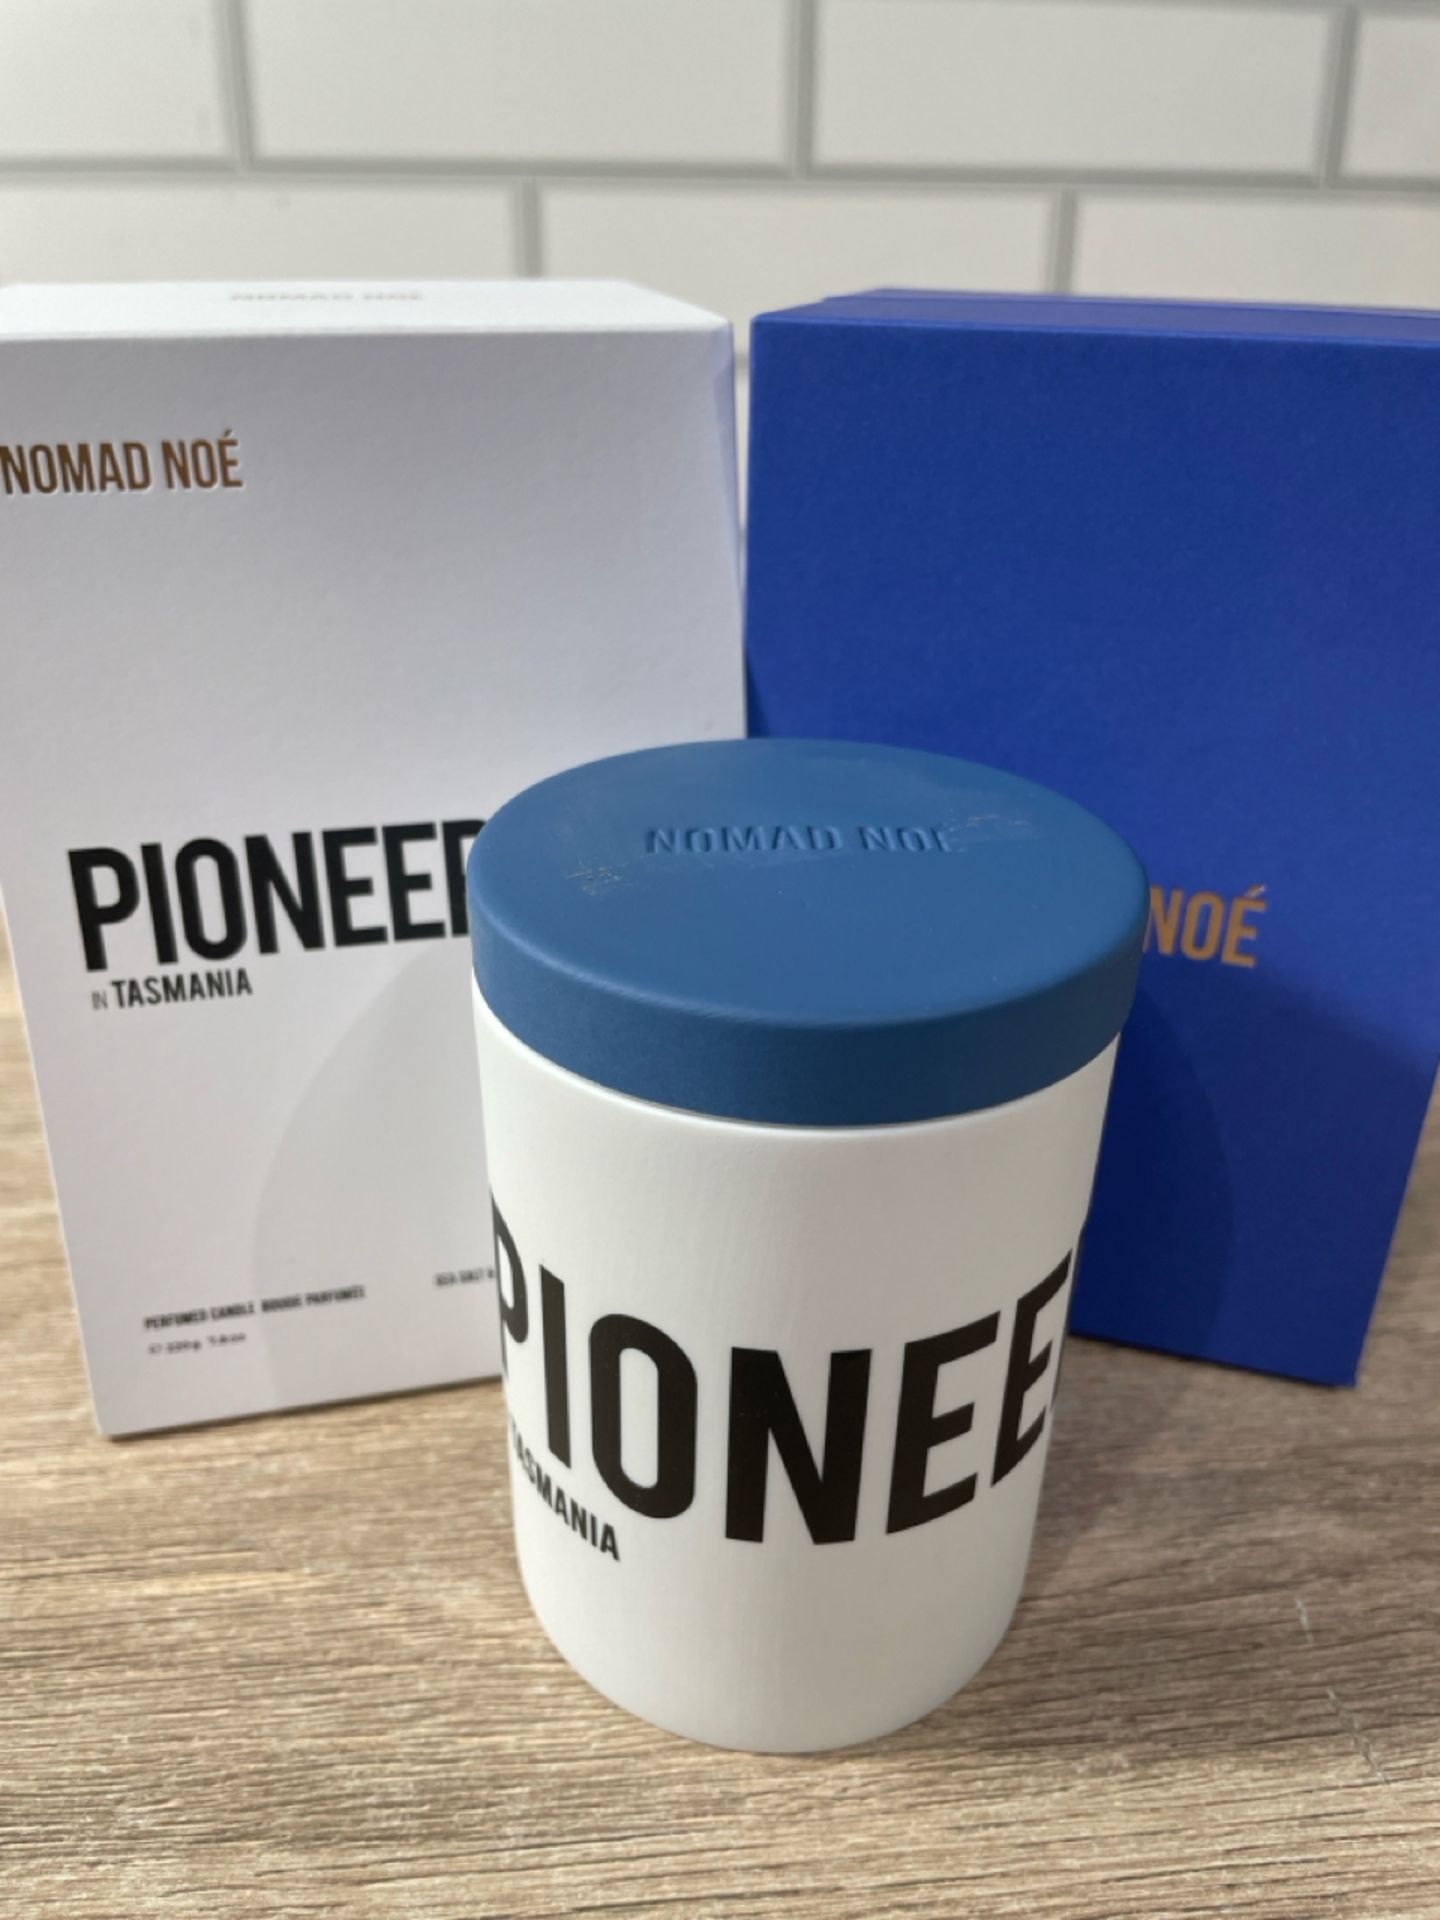 Pioneer Scented Candle from Nomad Noe - Image 4 of 4